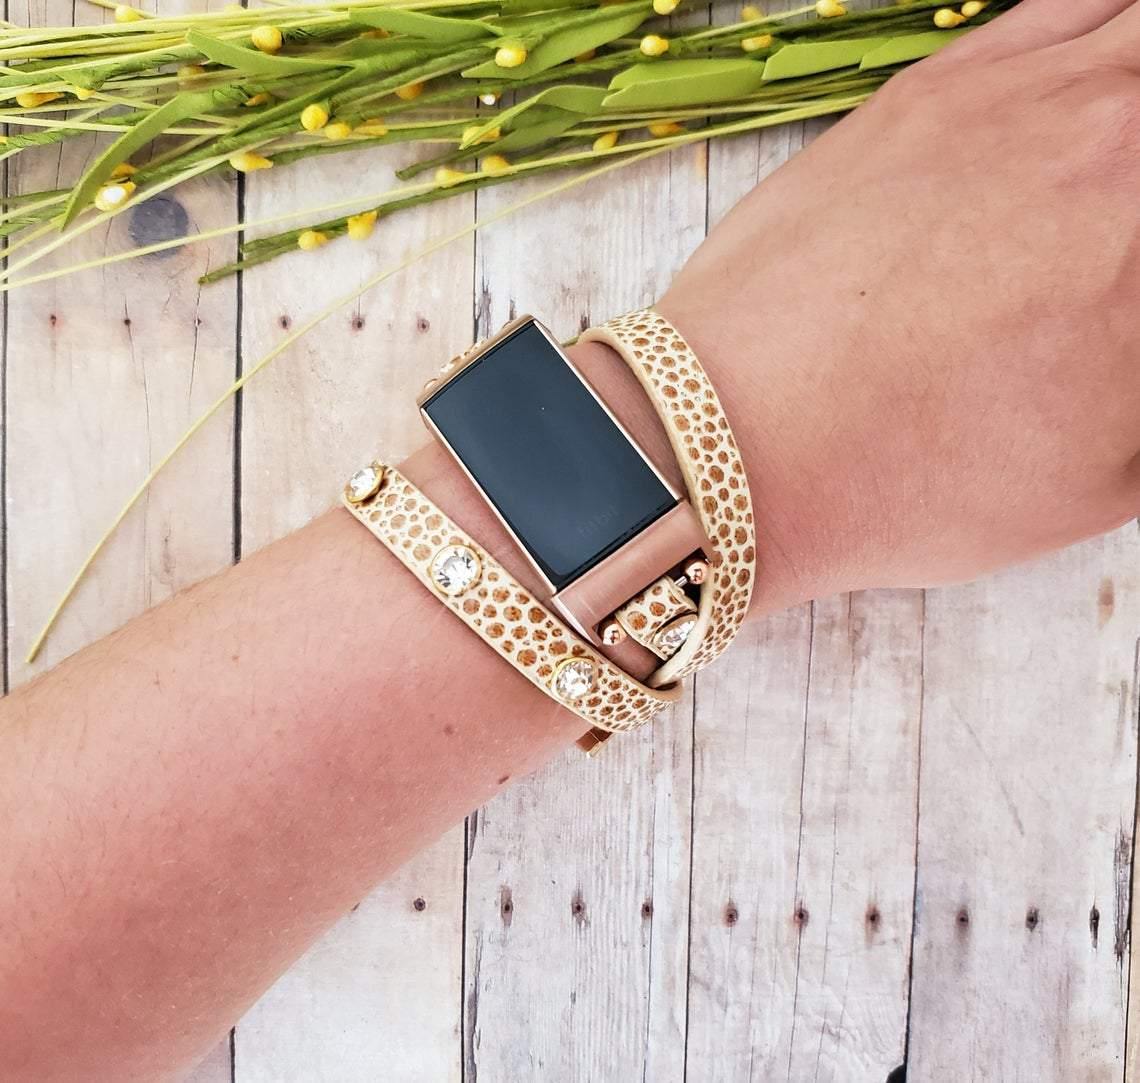 Cuff and Chain Bracelet For Fitbit Charge 4 & Charge 3